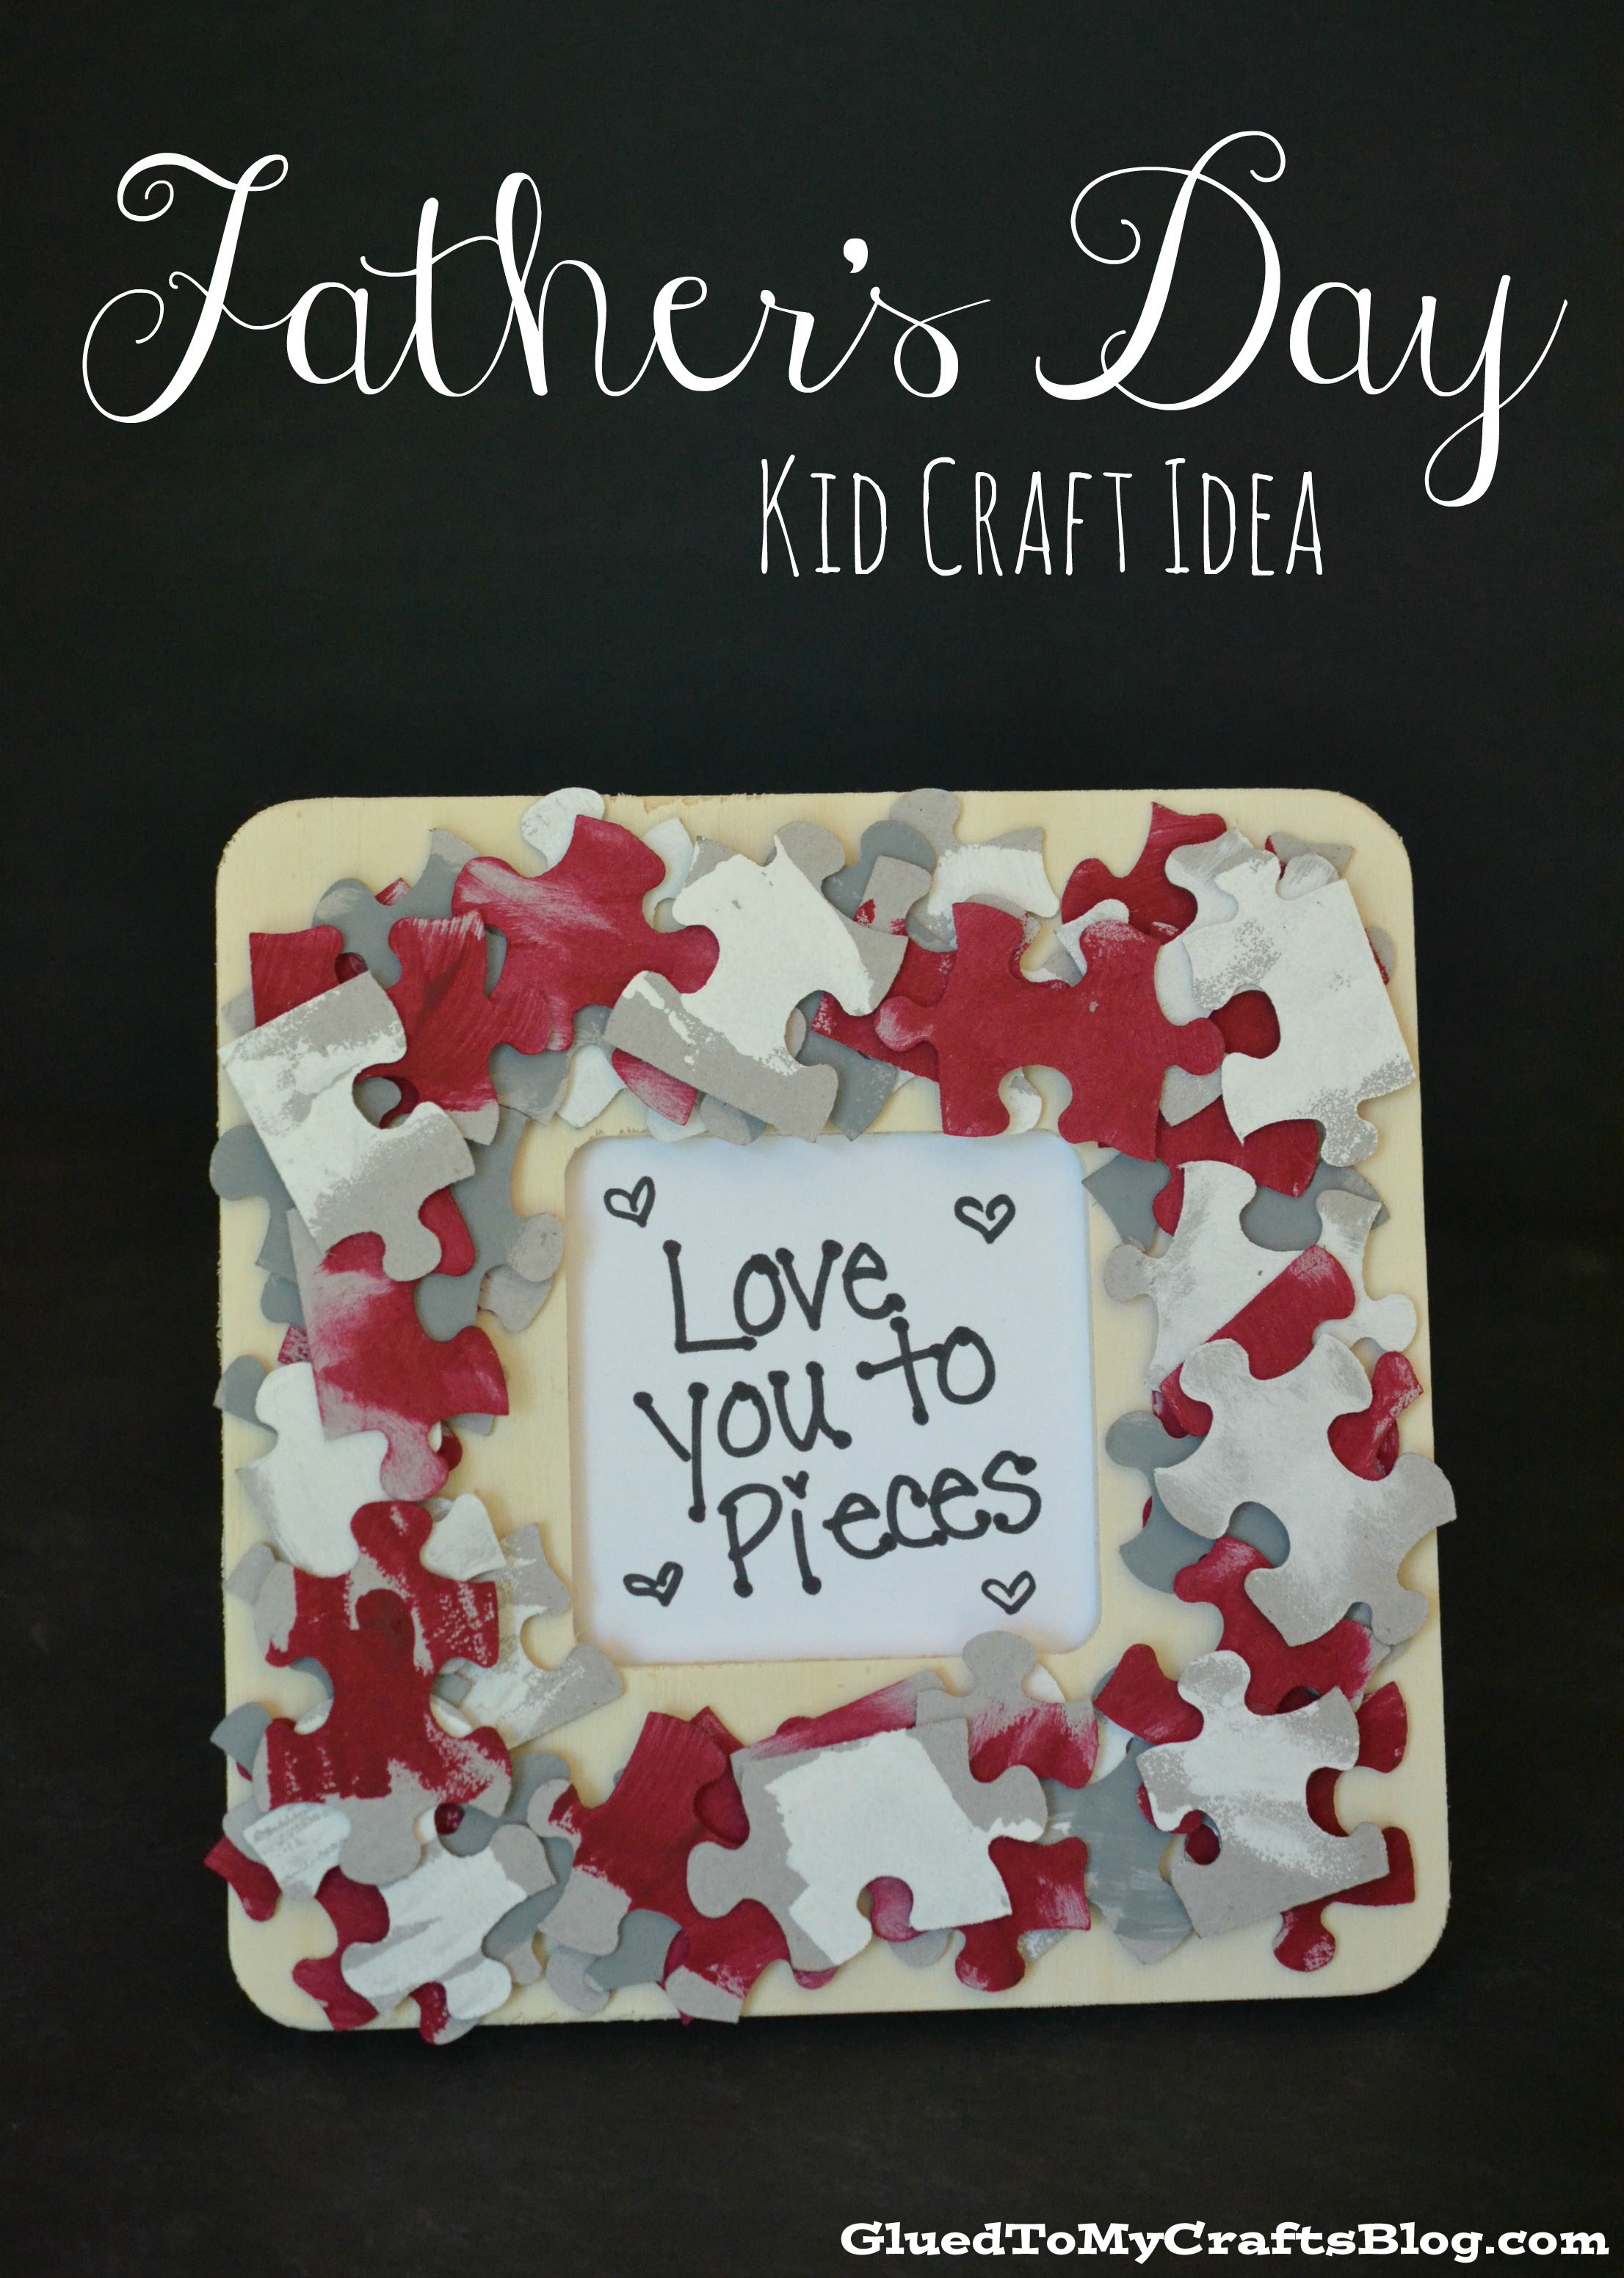 Love You To Pieces - Father's Day Kids Craft Idea | A Night Owl Blog
